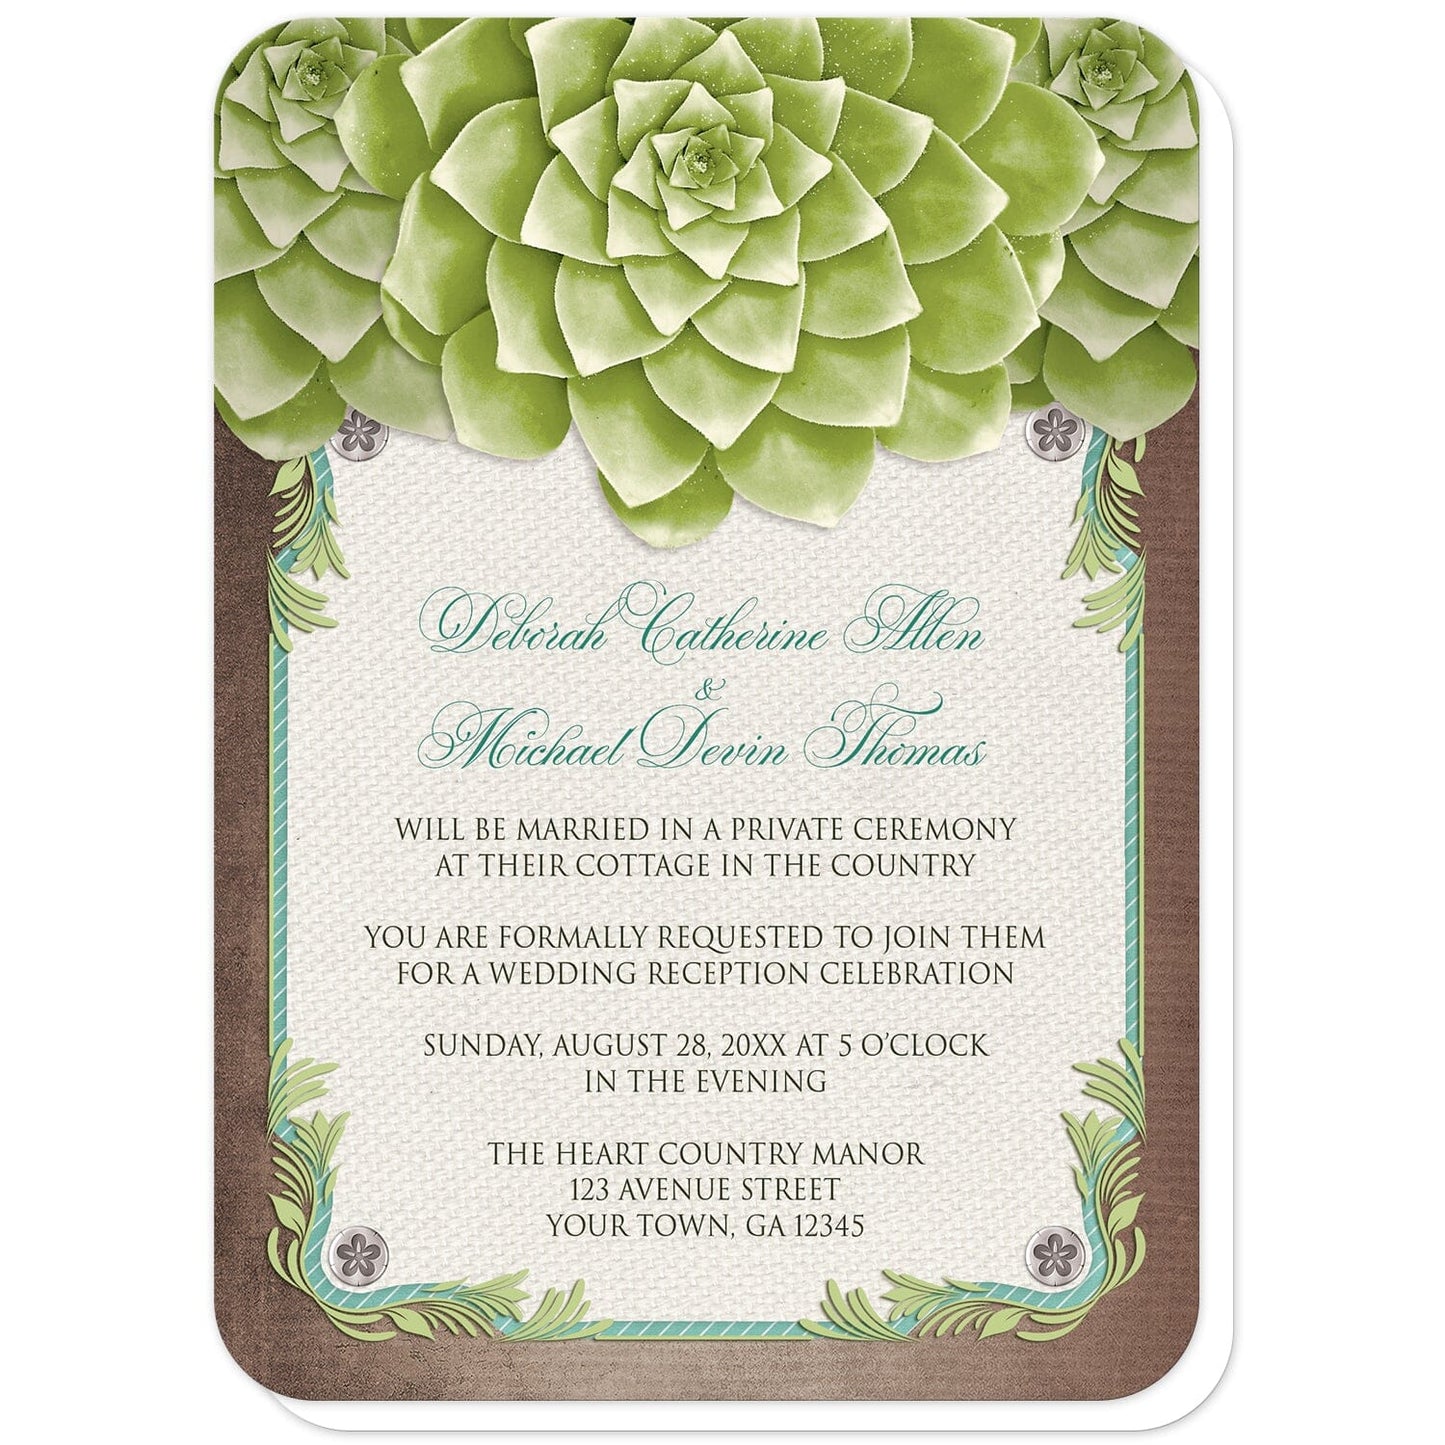 Rustic Succulent Garden Reception Only Invitations (with rounded corners) at Artistically Invited. Invites with three large and lovely green succulents along the top over a beige canvas texture illustration framed with a leafy green decorative border, striped teal, and four floral metal pin illustrations, all over a brown background along the edges. Your personalized post-wedding reception details are custom printed in brown and teal over the beige canvas background in the center area below the succulents. 